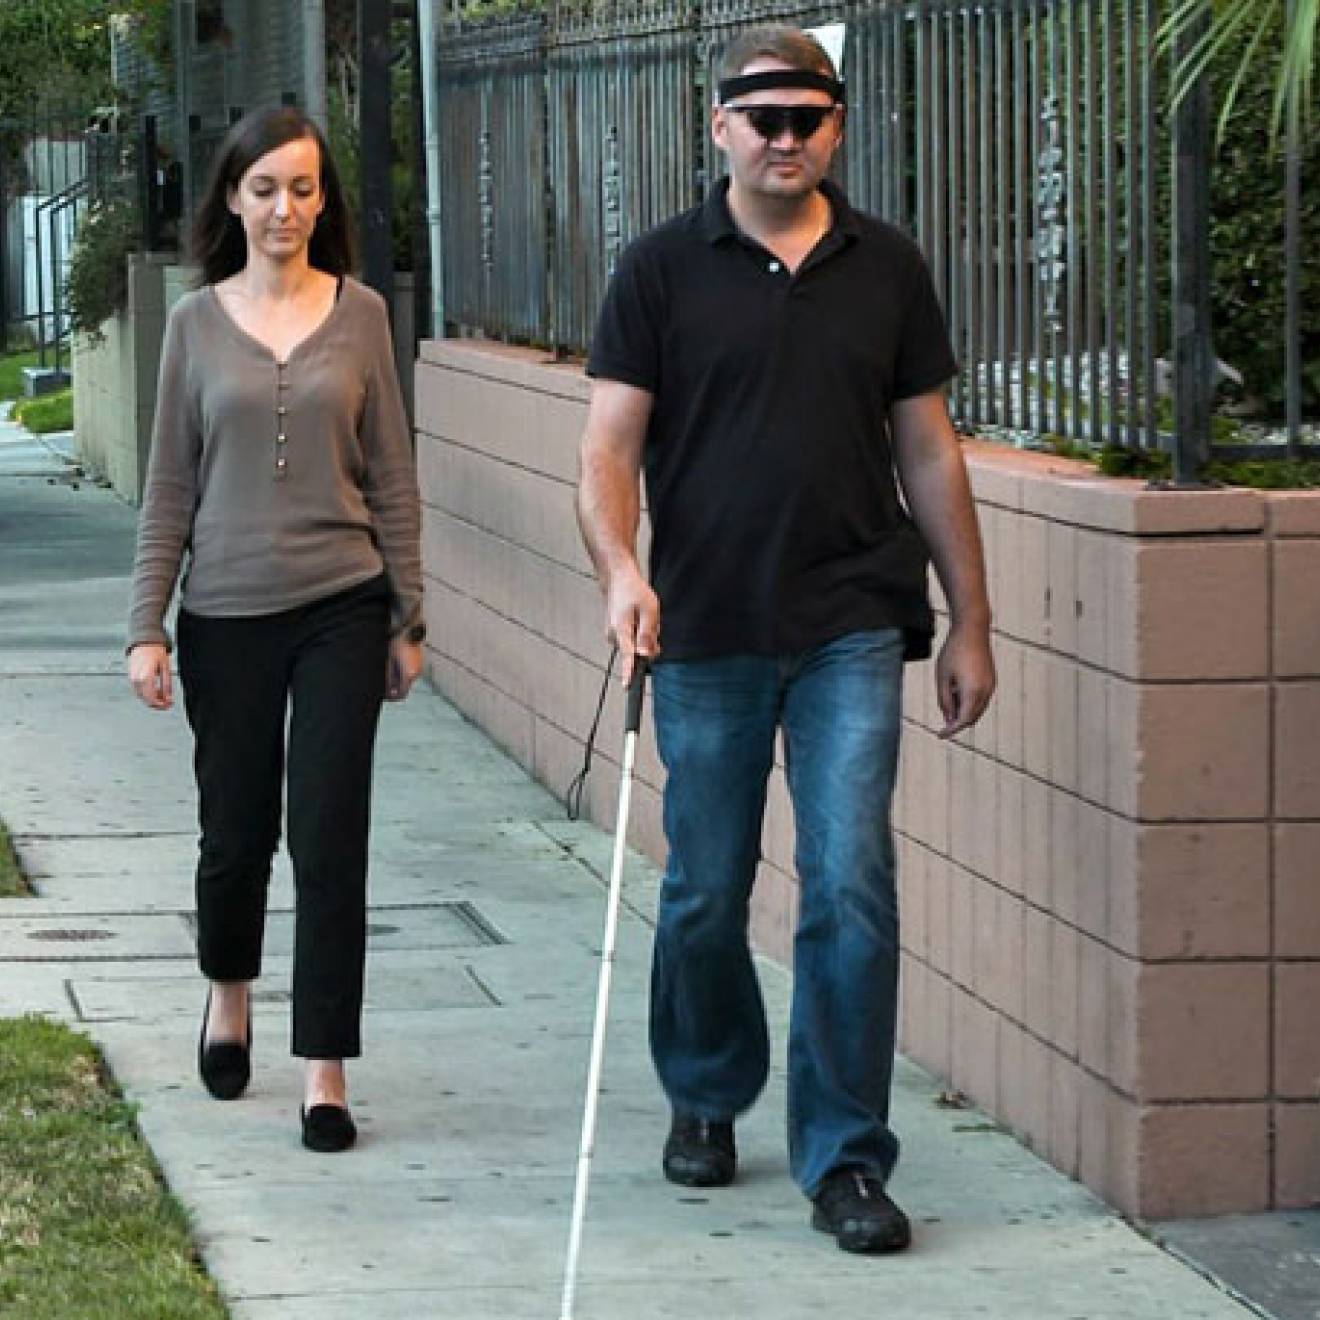 A man with a cane walking with a woman just behind him